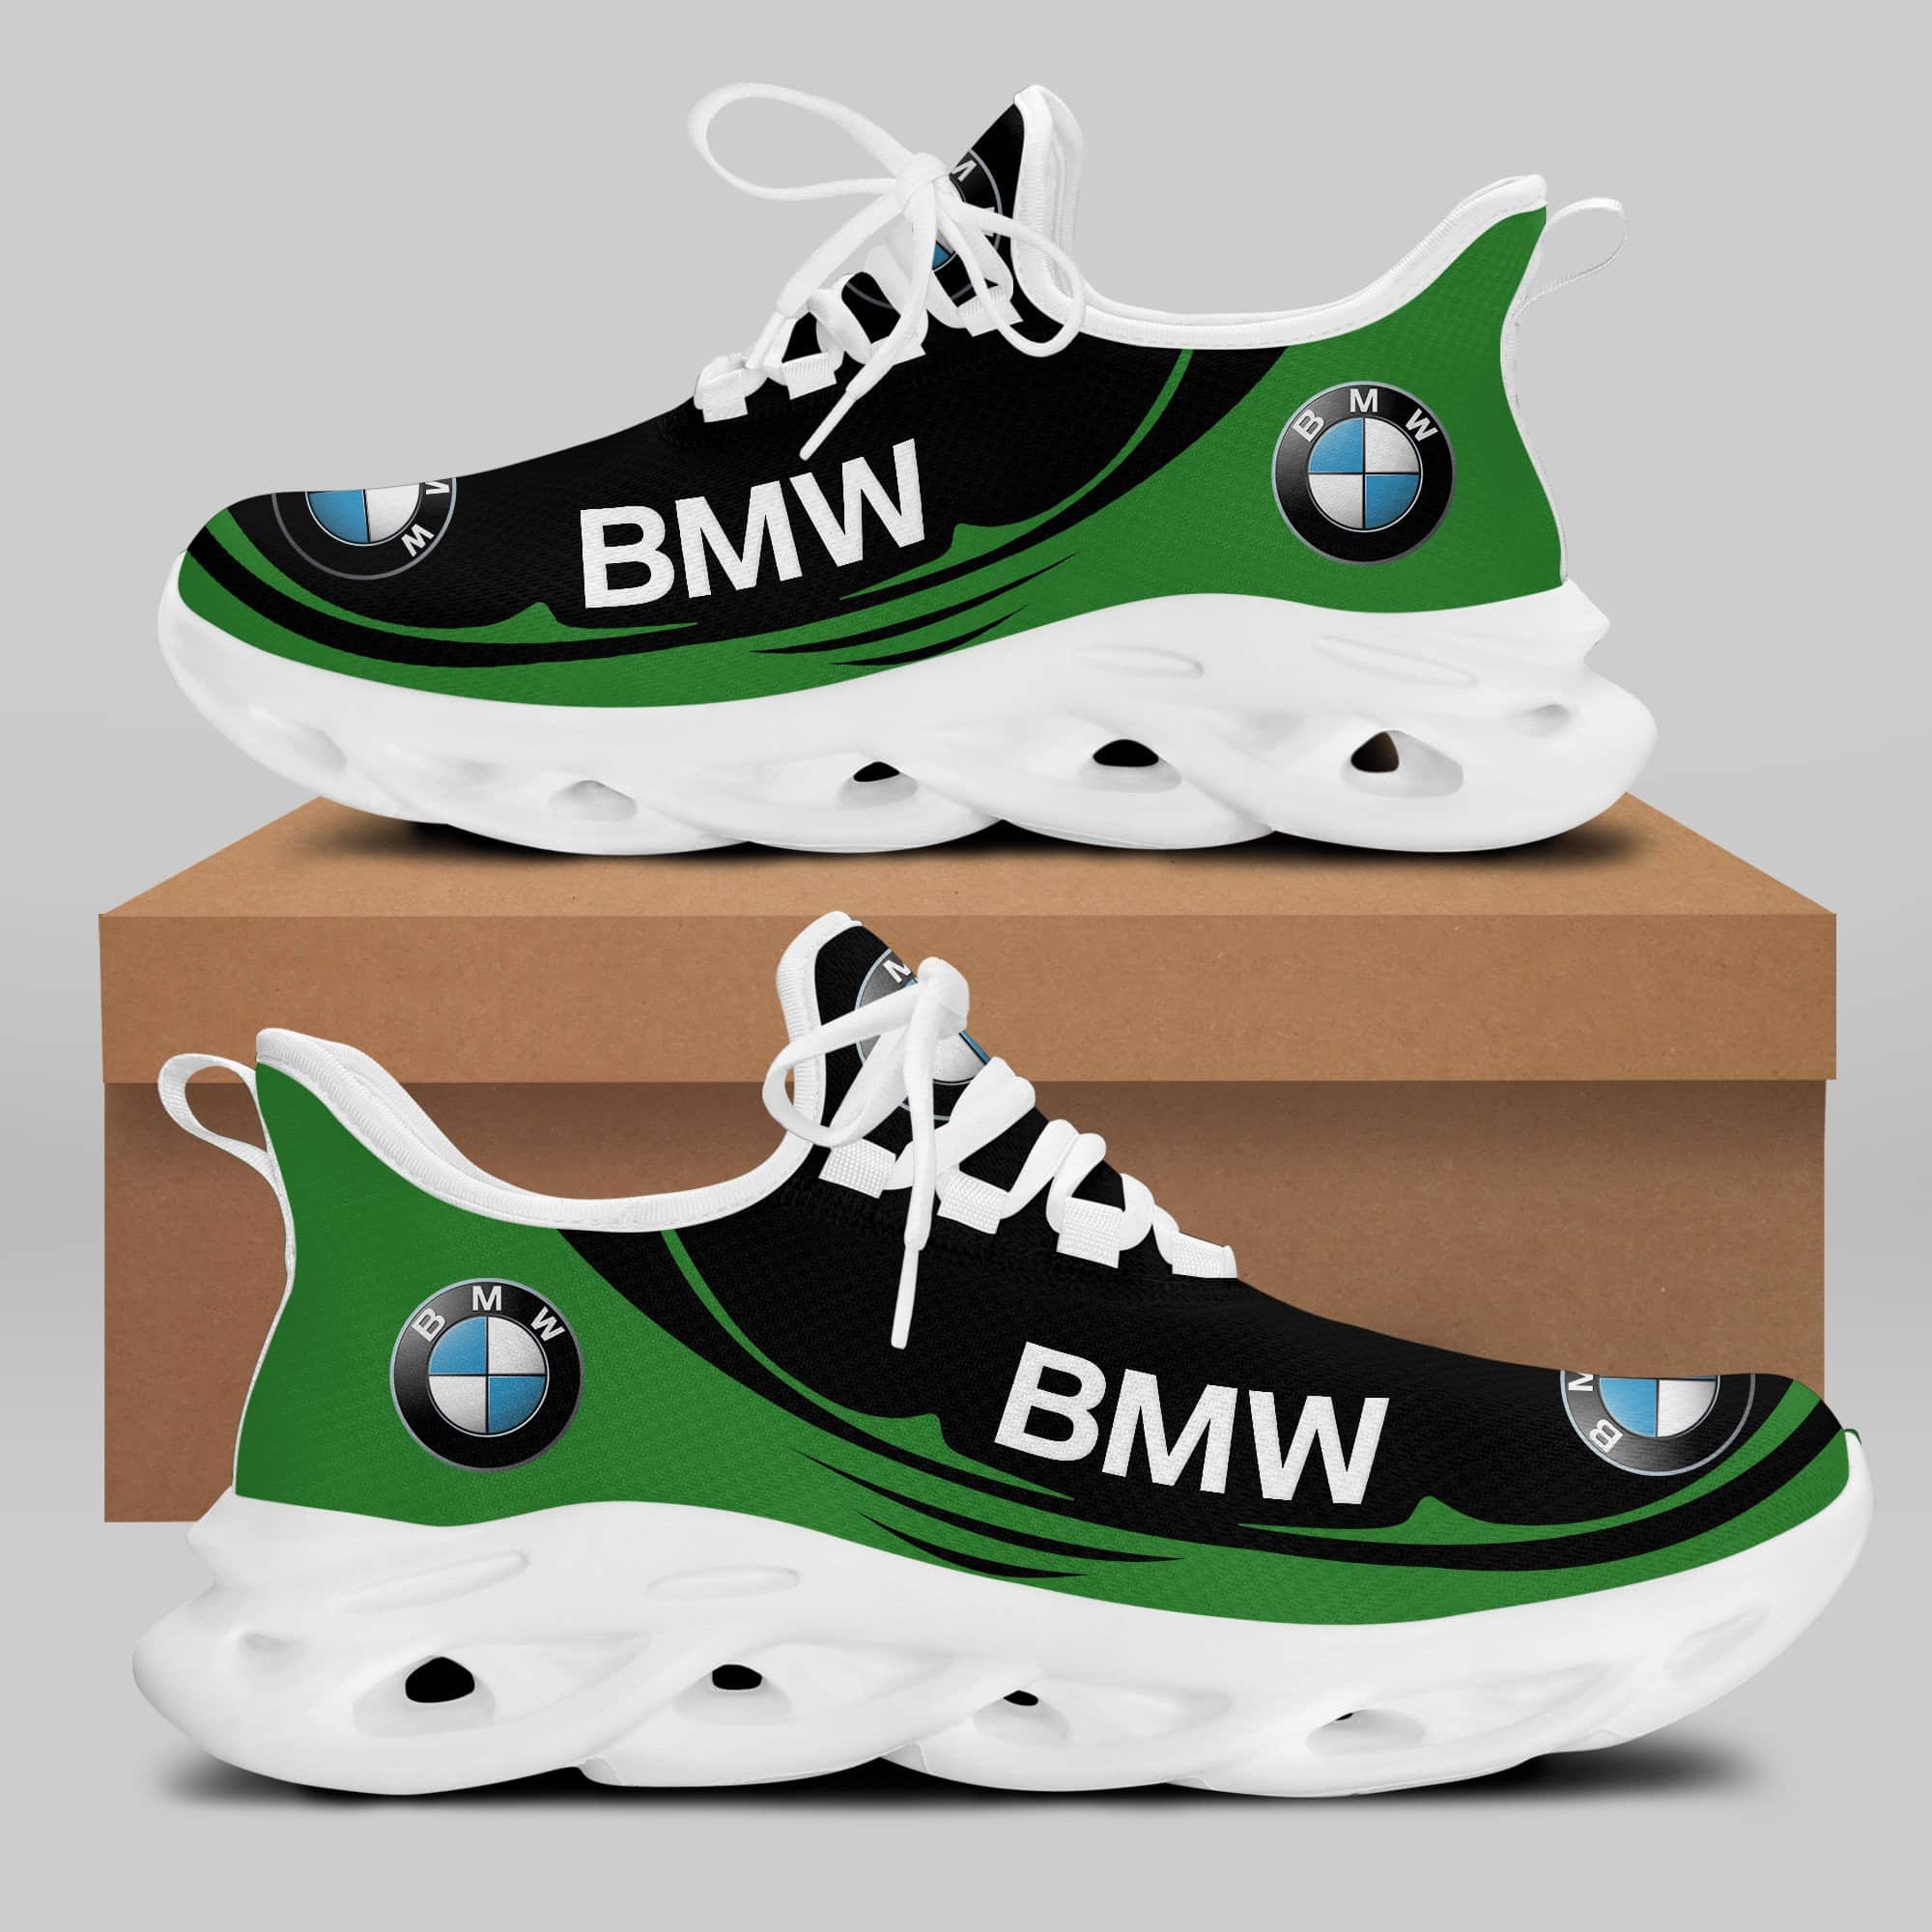 Bmw Running Shoes Max Soul Shoes Sneakers Ver 28 2